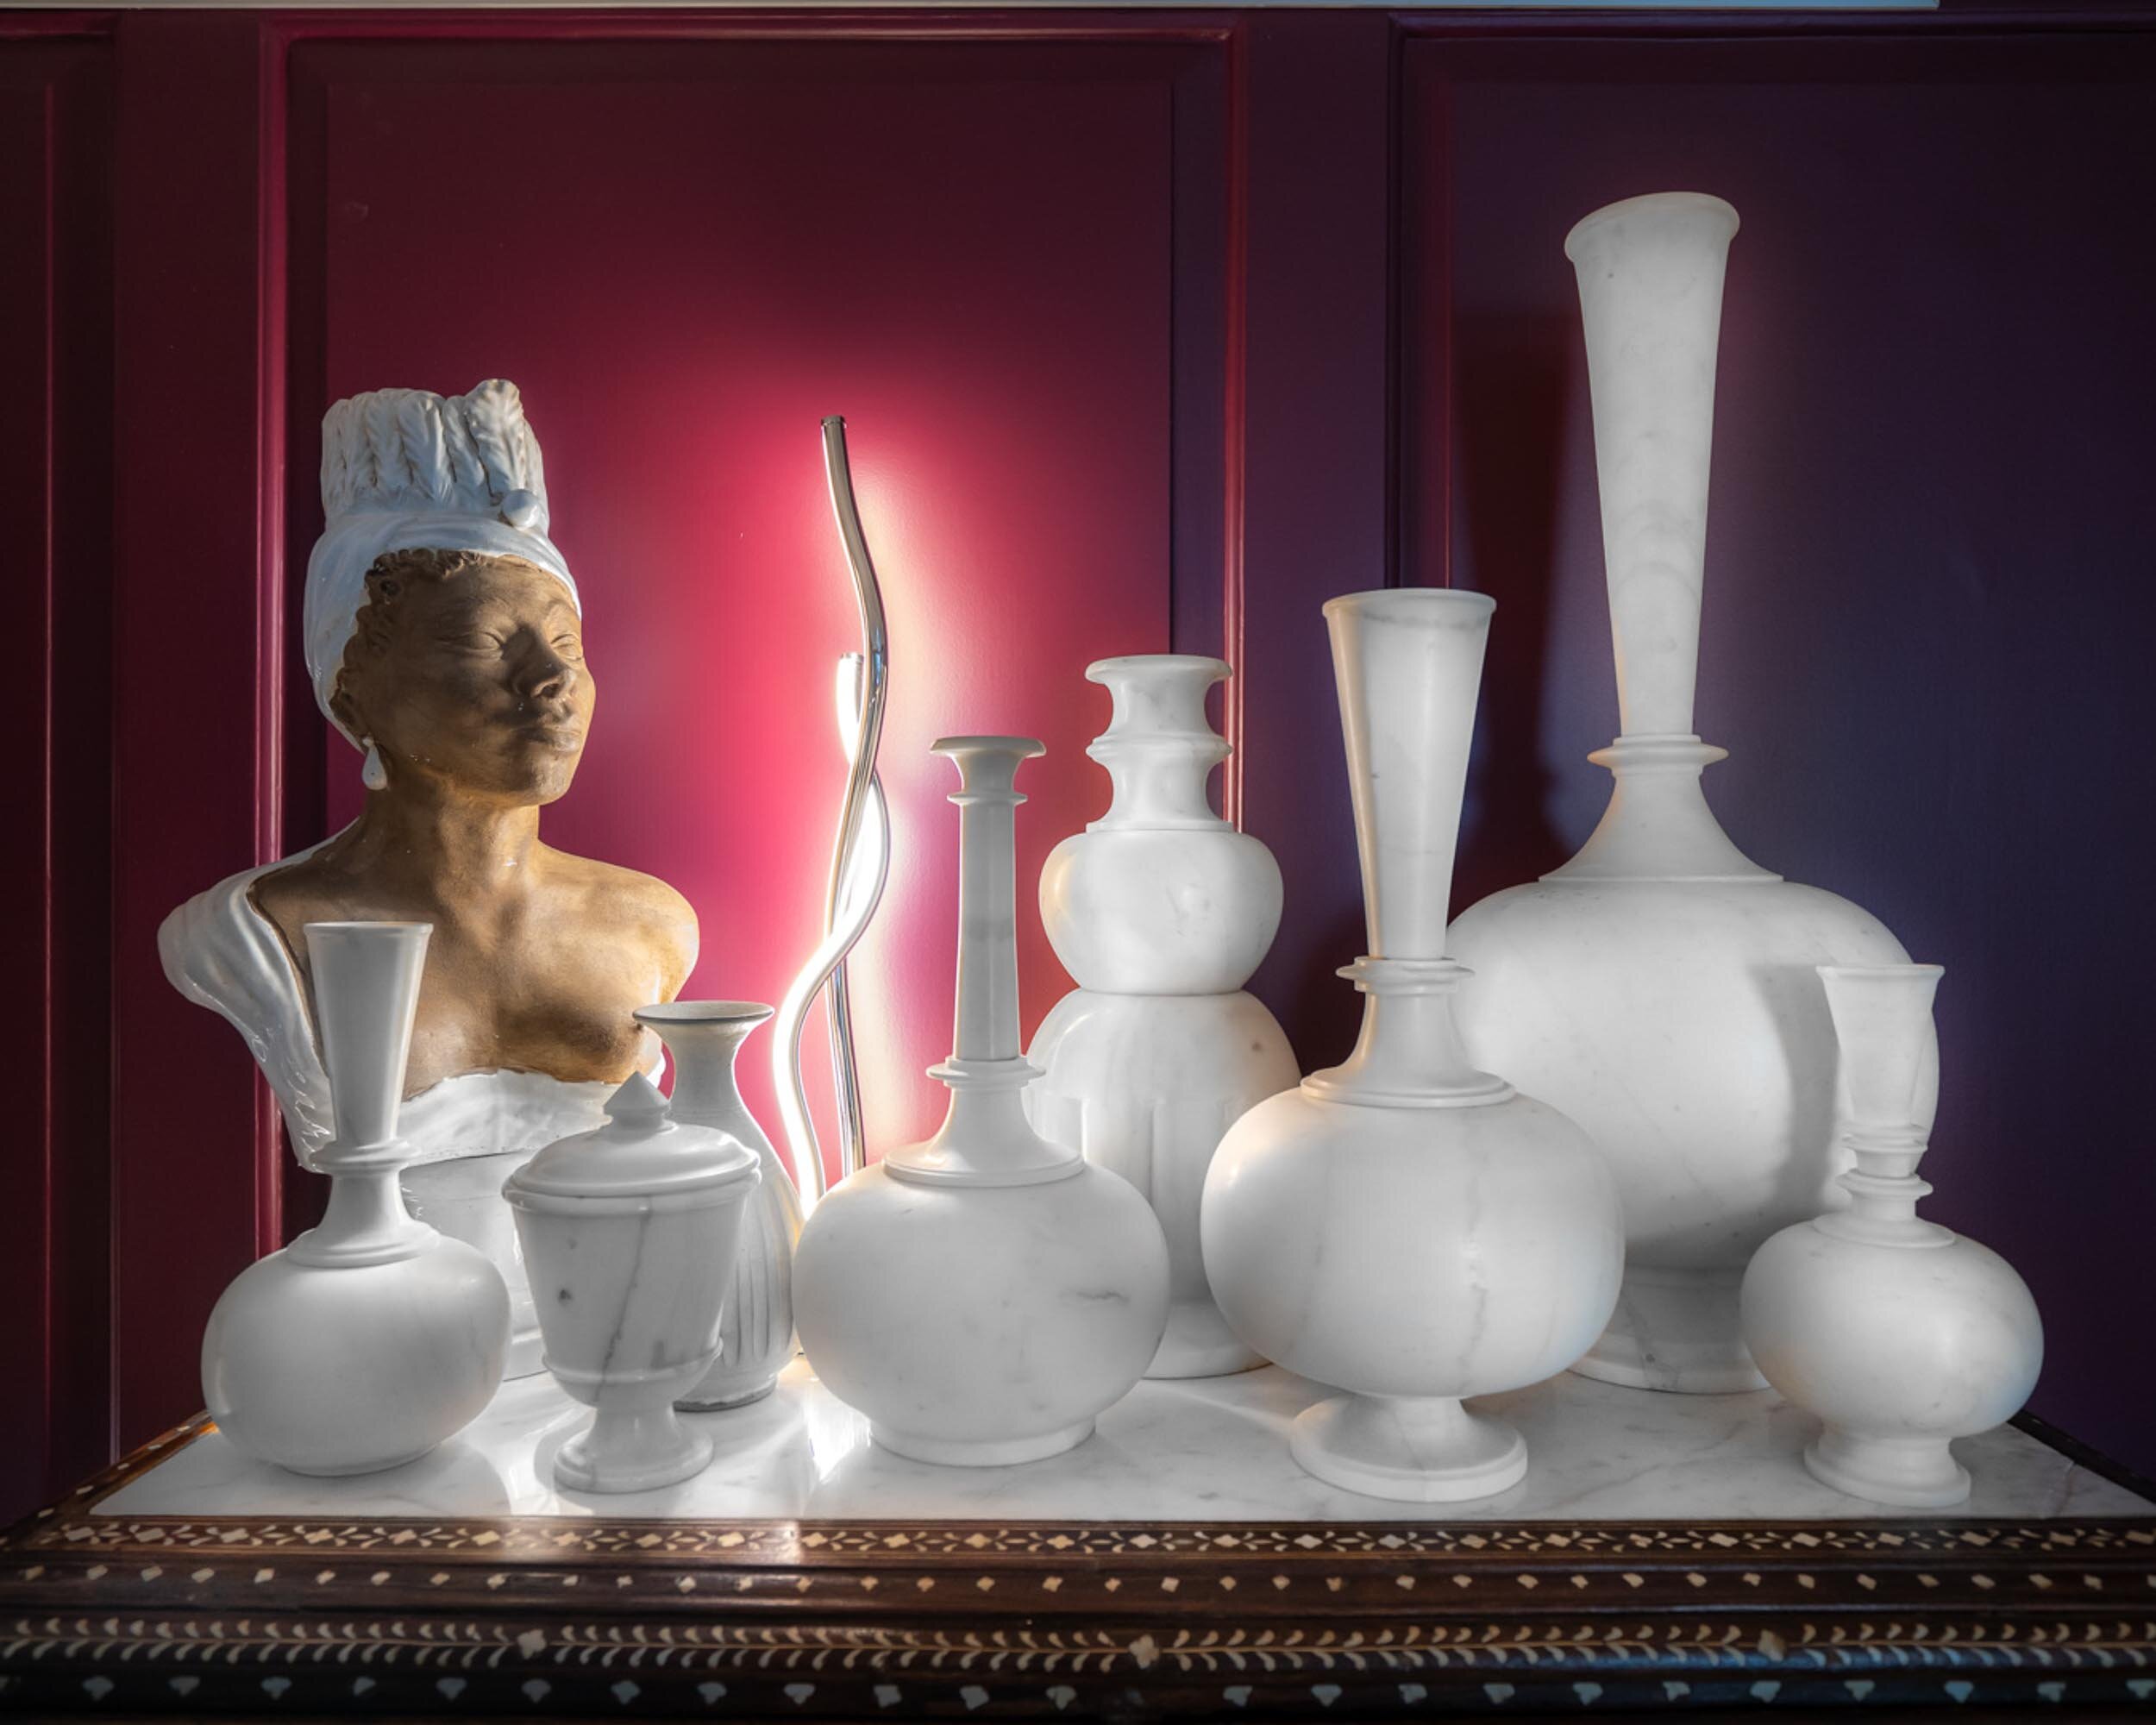  #bradsteinphoto, Highlights from the #kipsbayshowhouse19 @vicentewolfdesigns creative bathing/lounging area, aubergine walls is the backdrop for a wonderful collection of marble vessels crowd around a 1940s bust of a woman atop an inlaid Indian ches